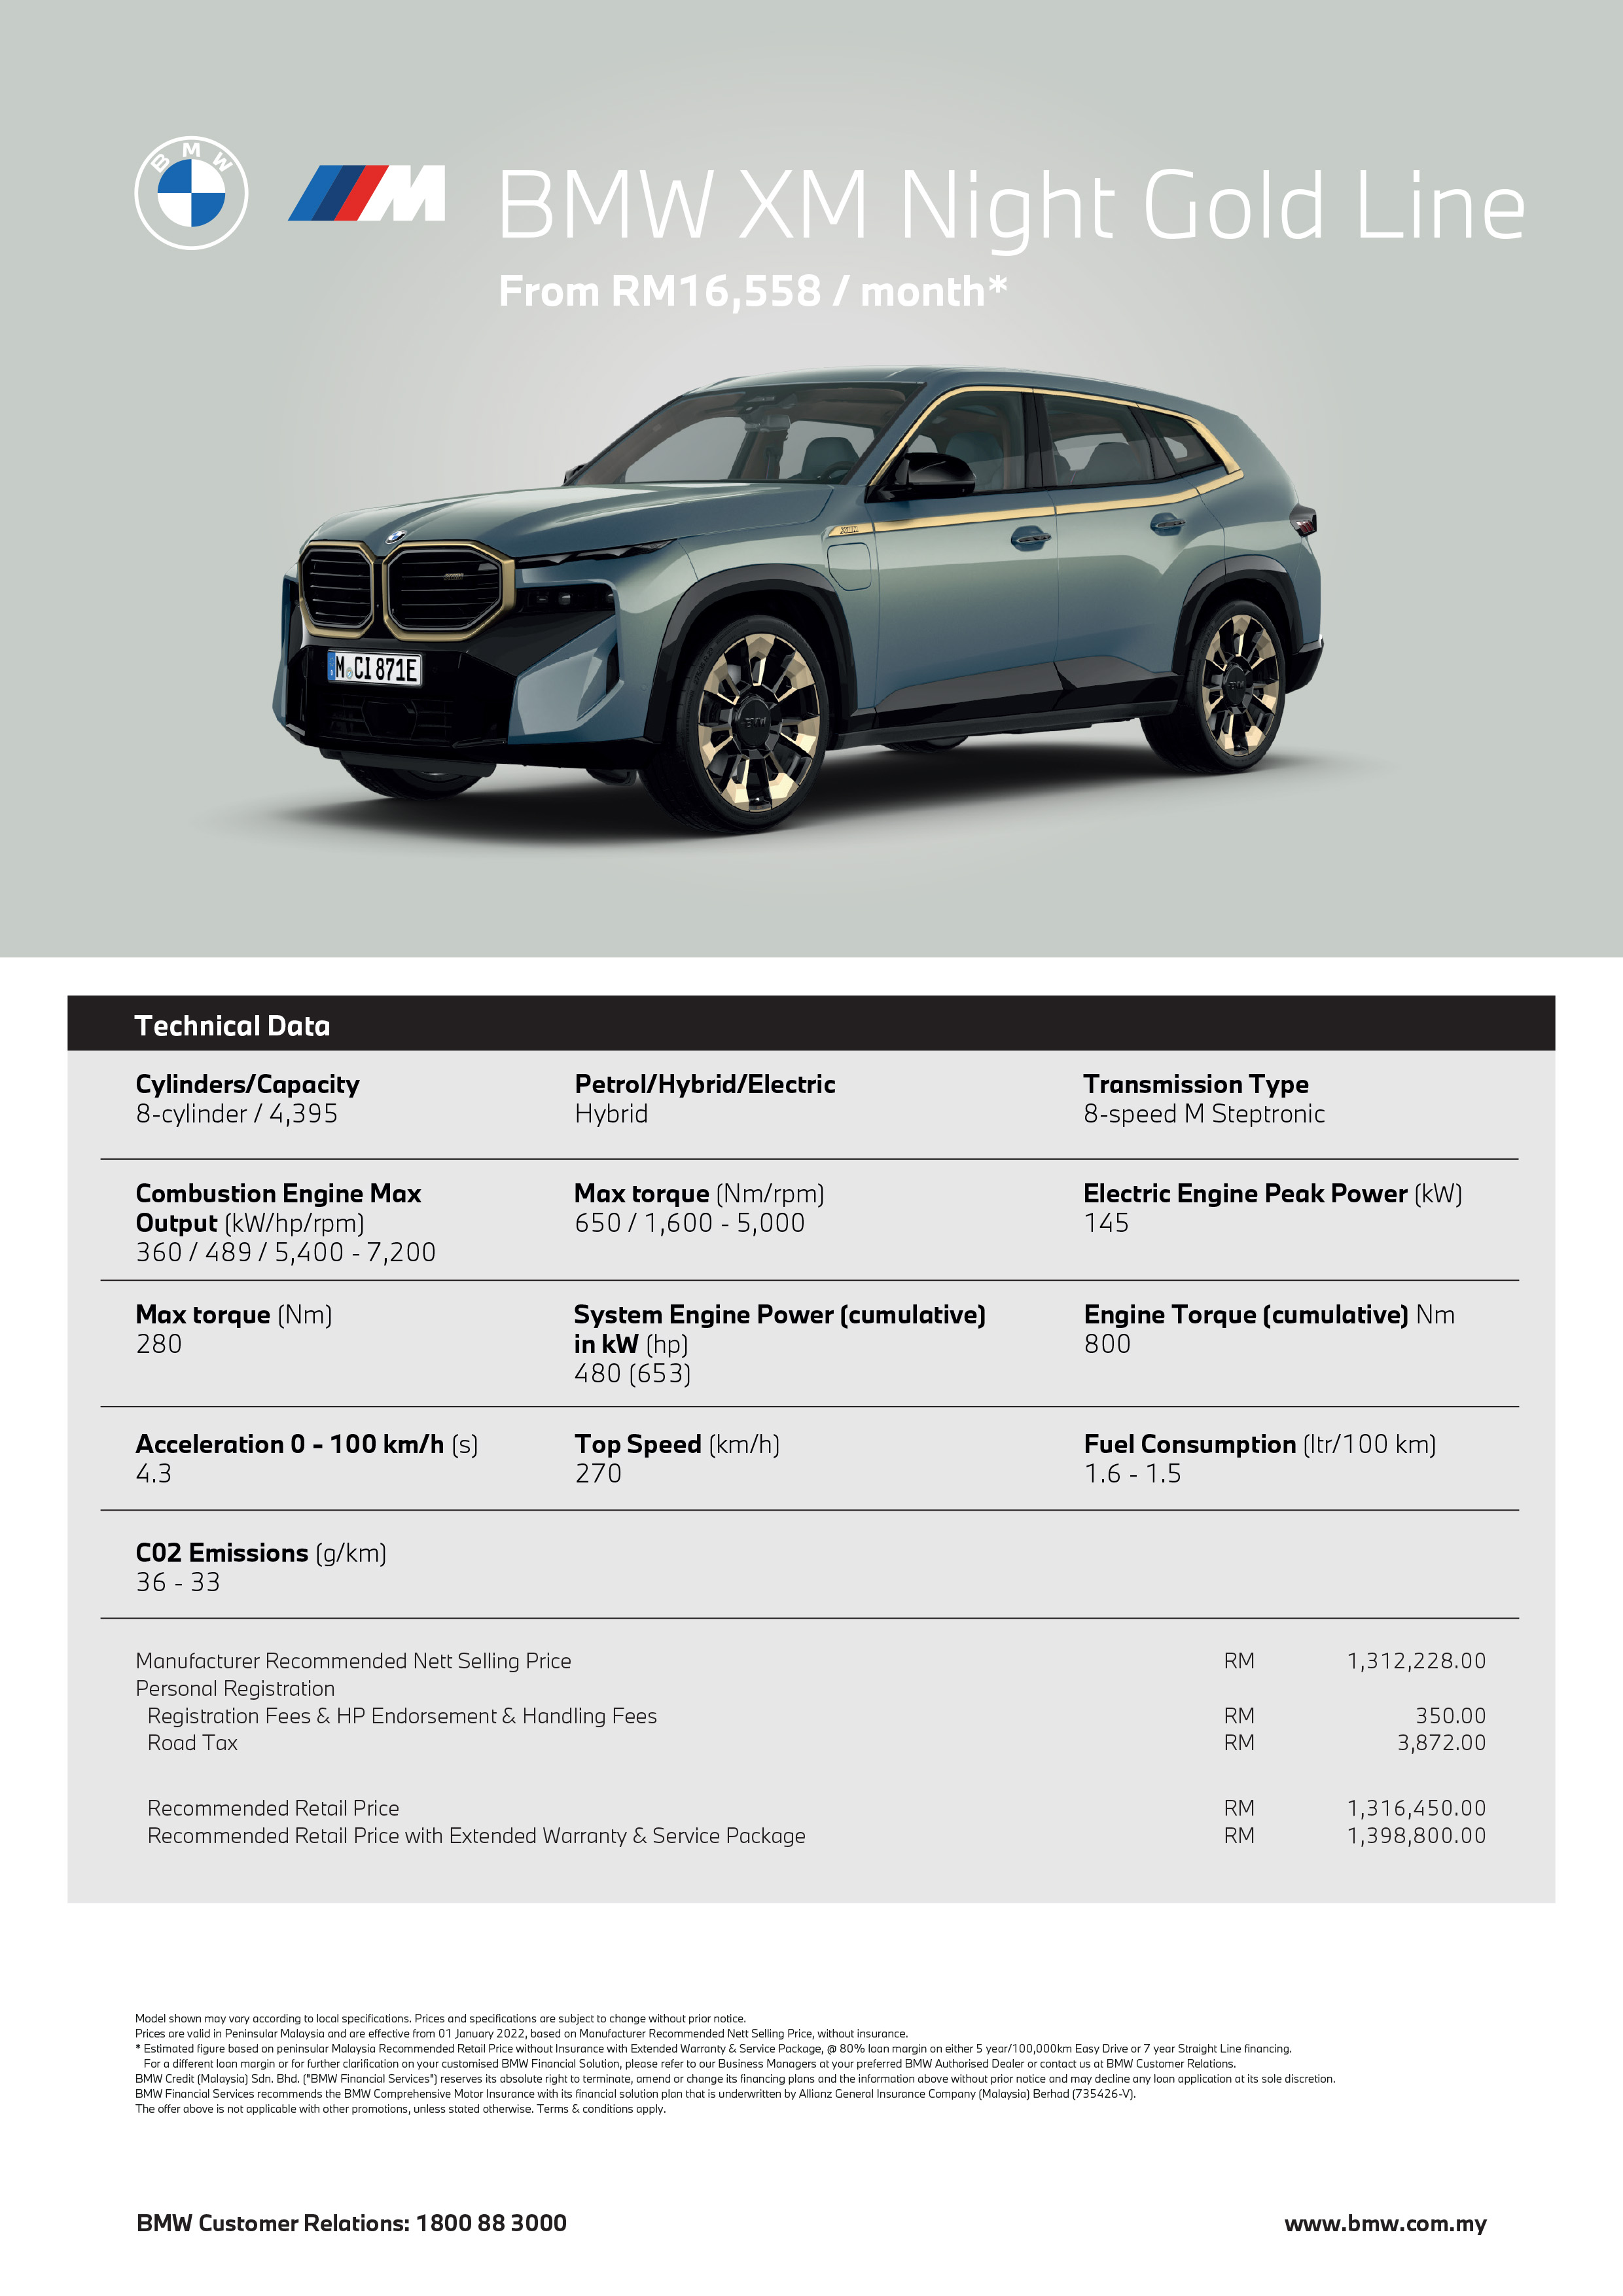 BMW_specs_sheet_XM-Night_PM taille A4_V_01